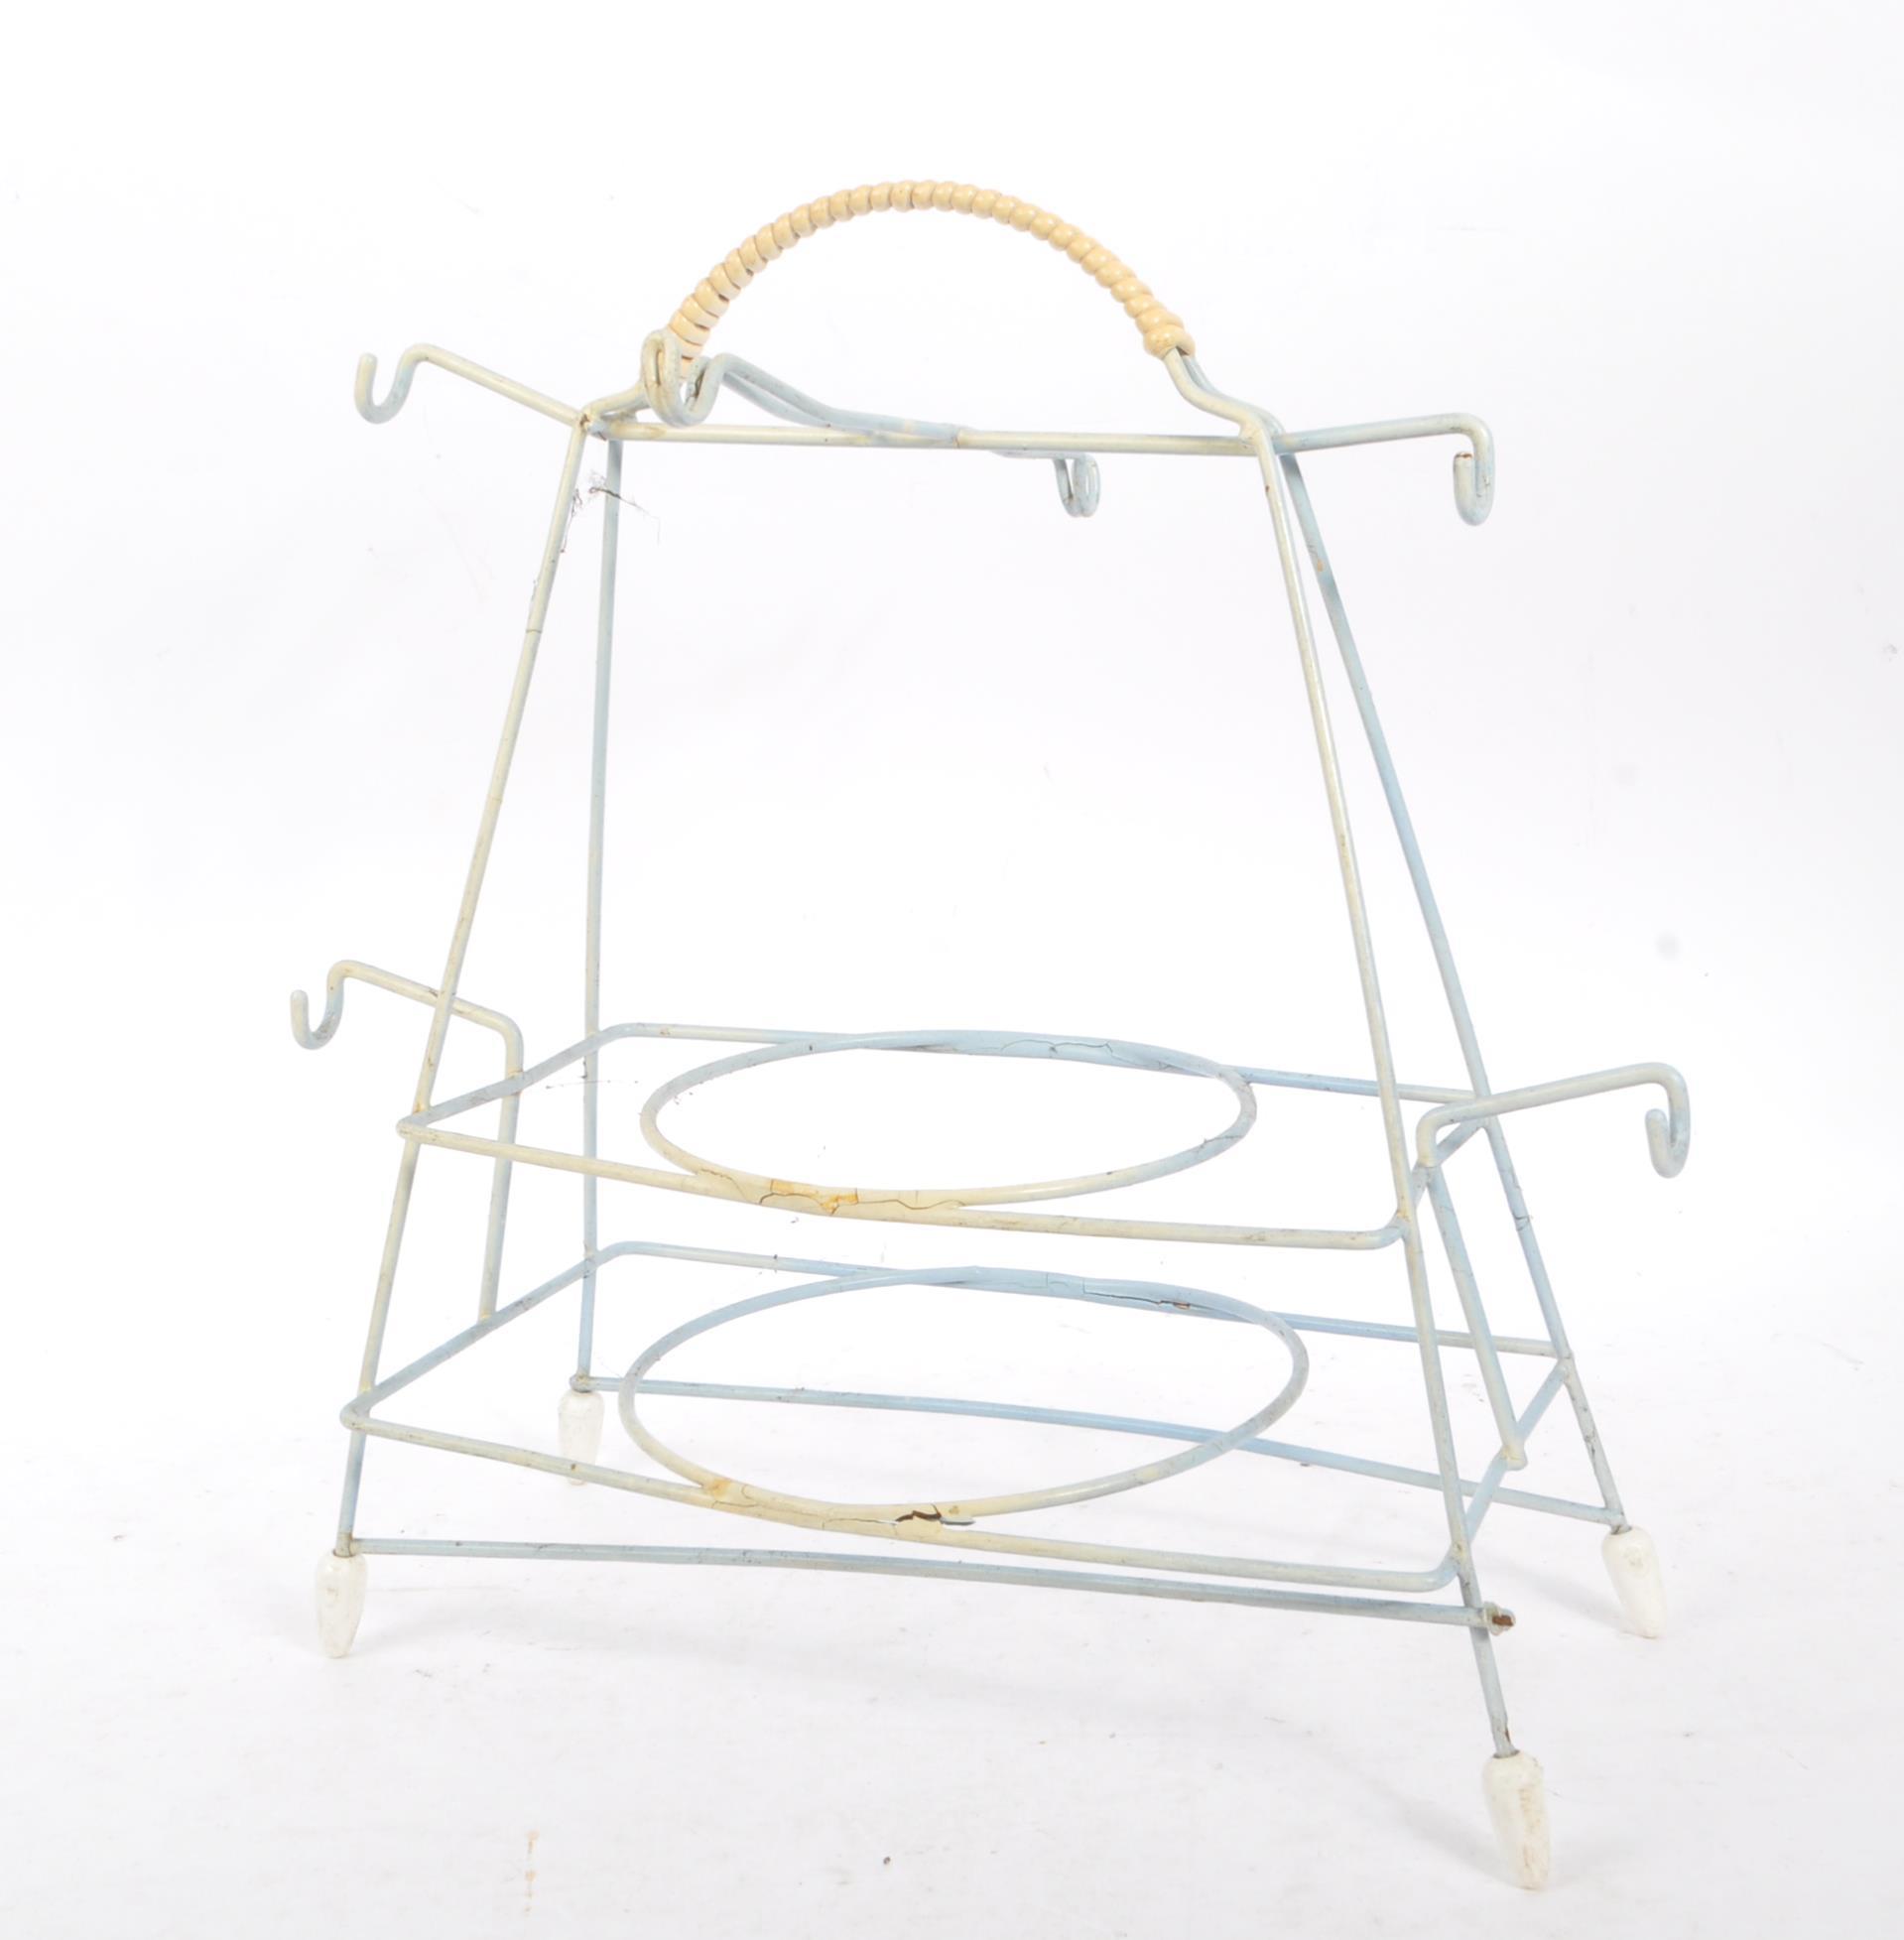 COLLECTION OF MID CENTURY WIRE RACKS - Image 3 of 5